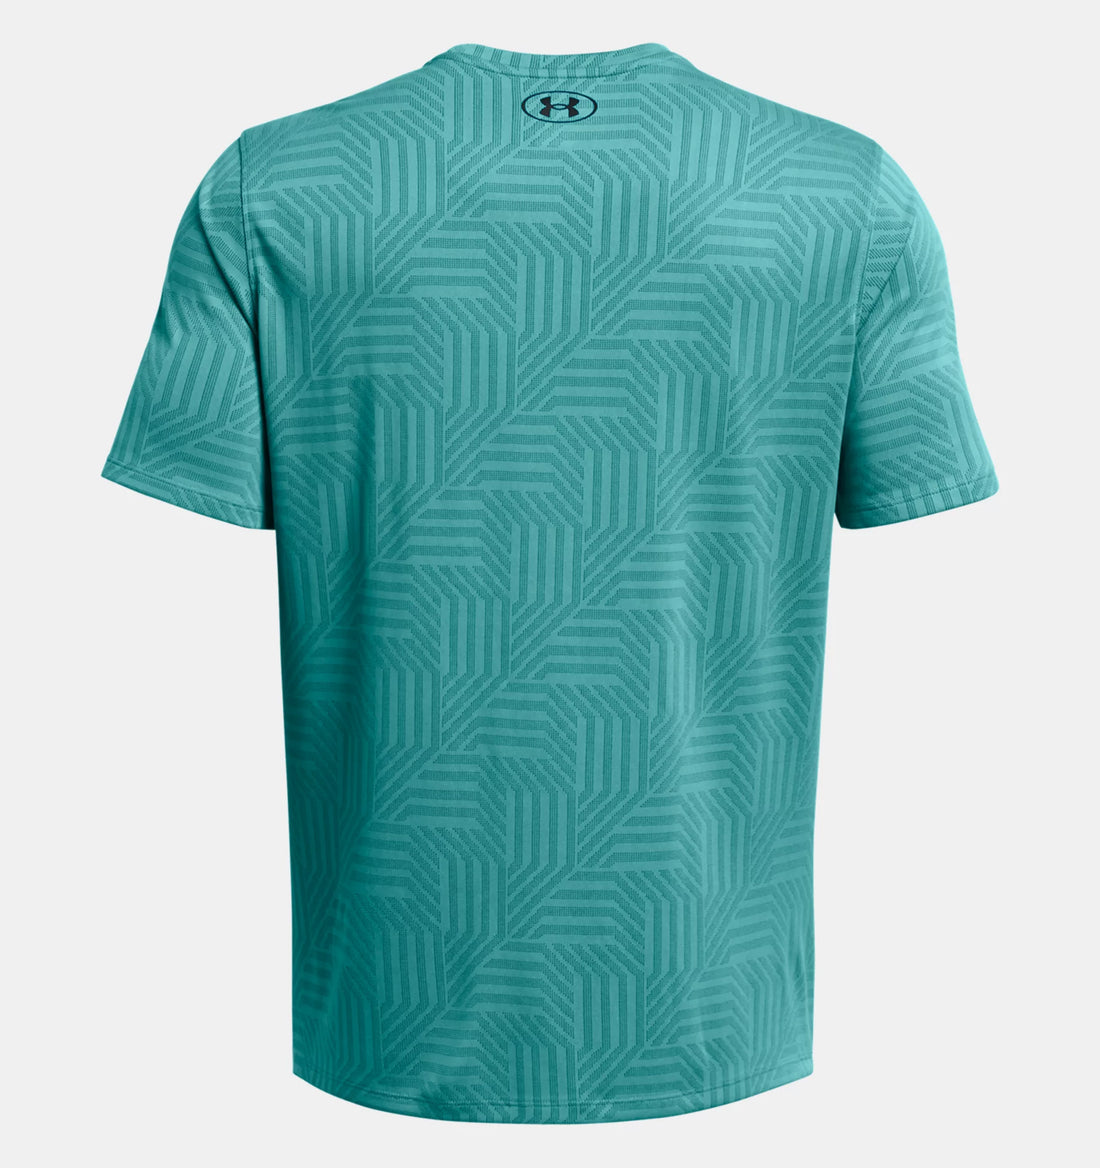 UNDER ARMOUR VENT T SHIRT - TEAL